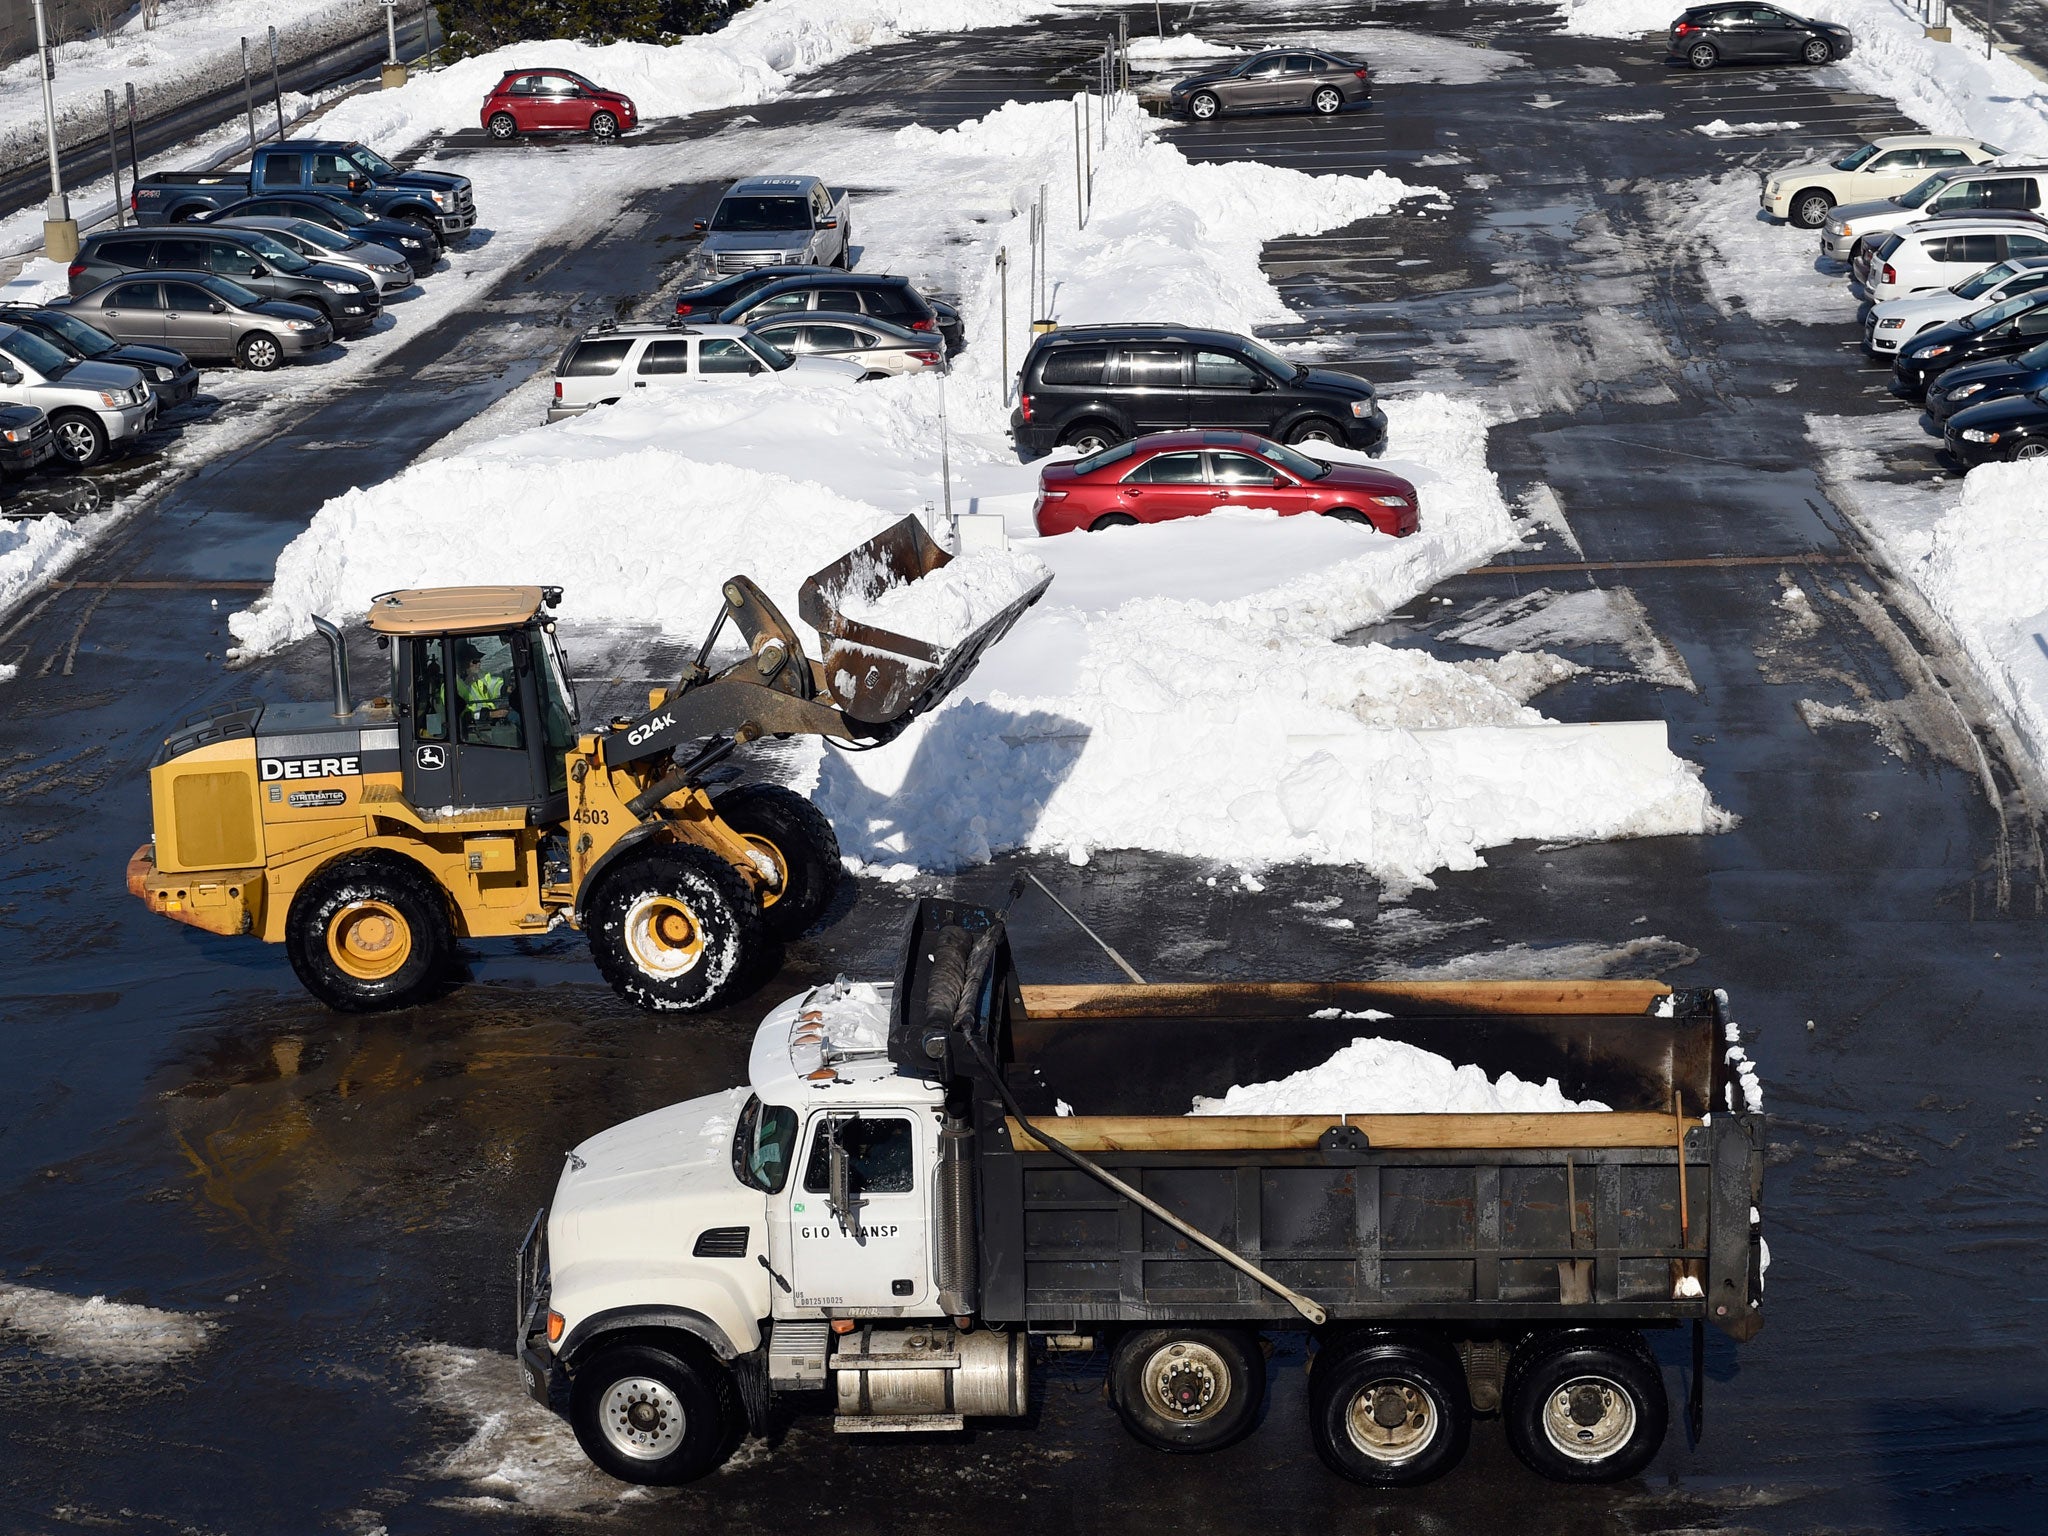 The death struggle for post-blizzard parking is playing out in different ways along the East Coast